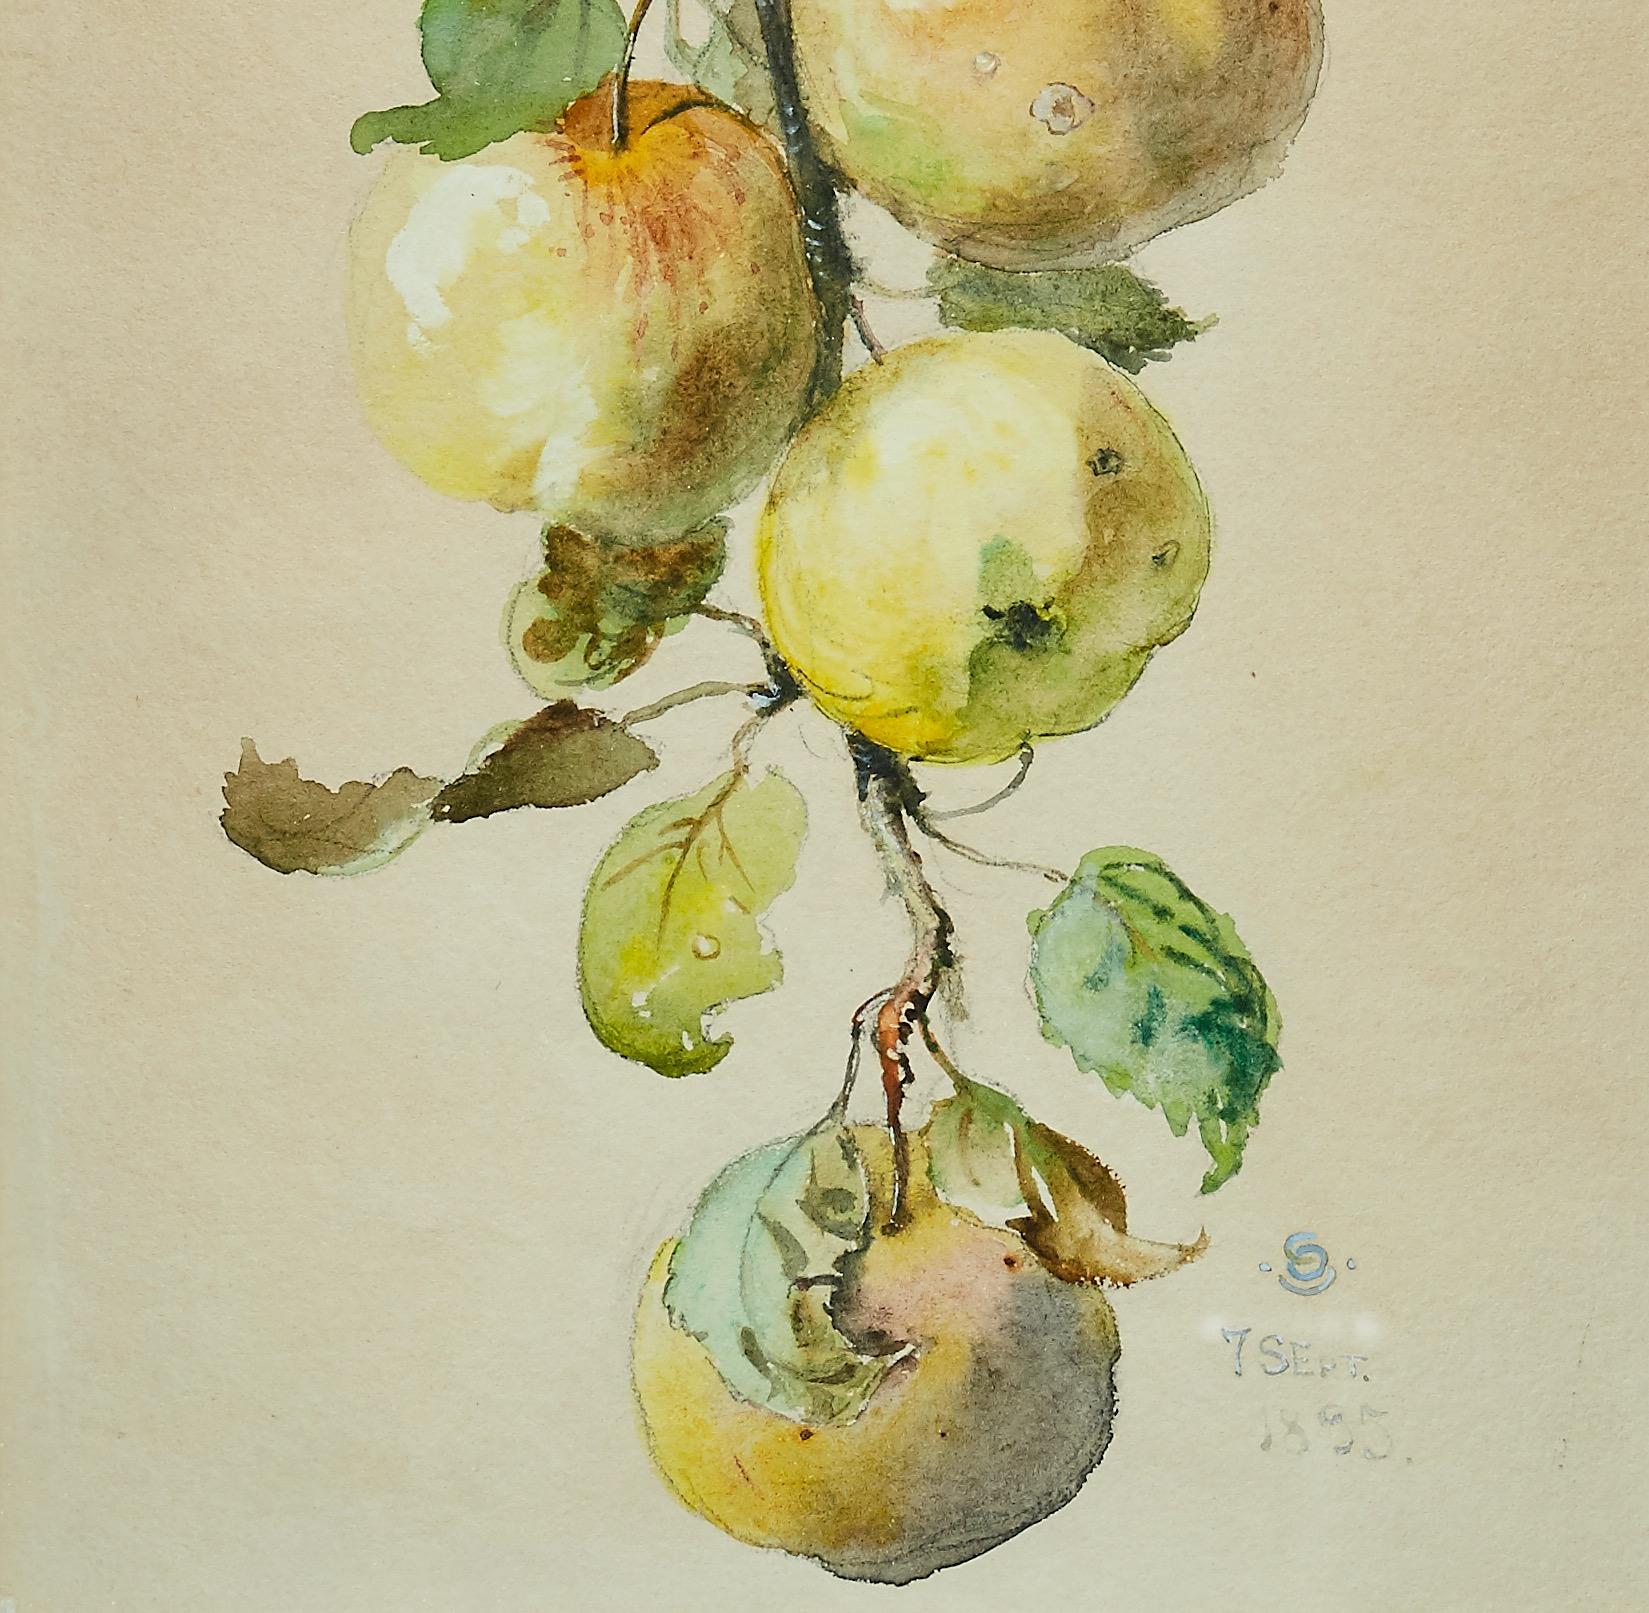 Tree Branch With Apples, Watercolor, 1895 - Naturalistic Painting by Otto Strandman